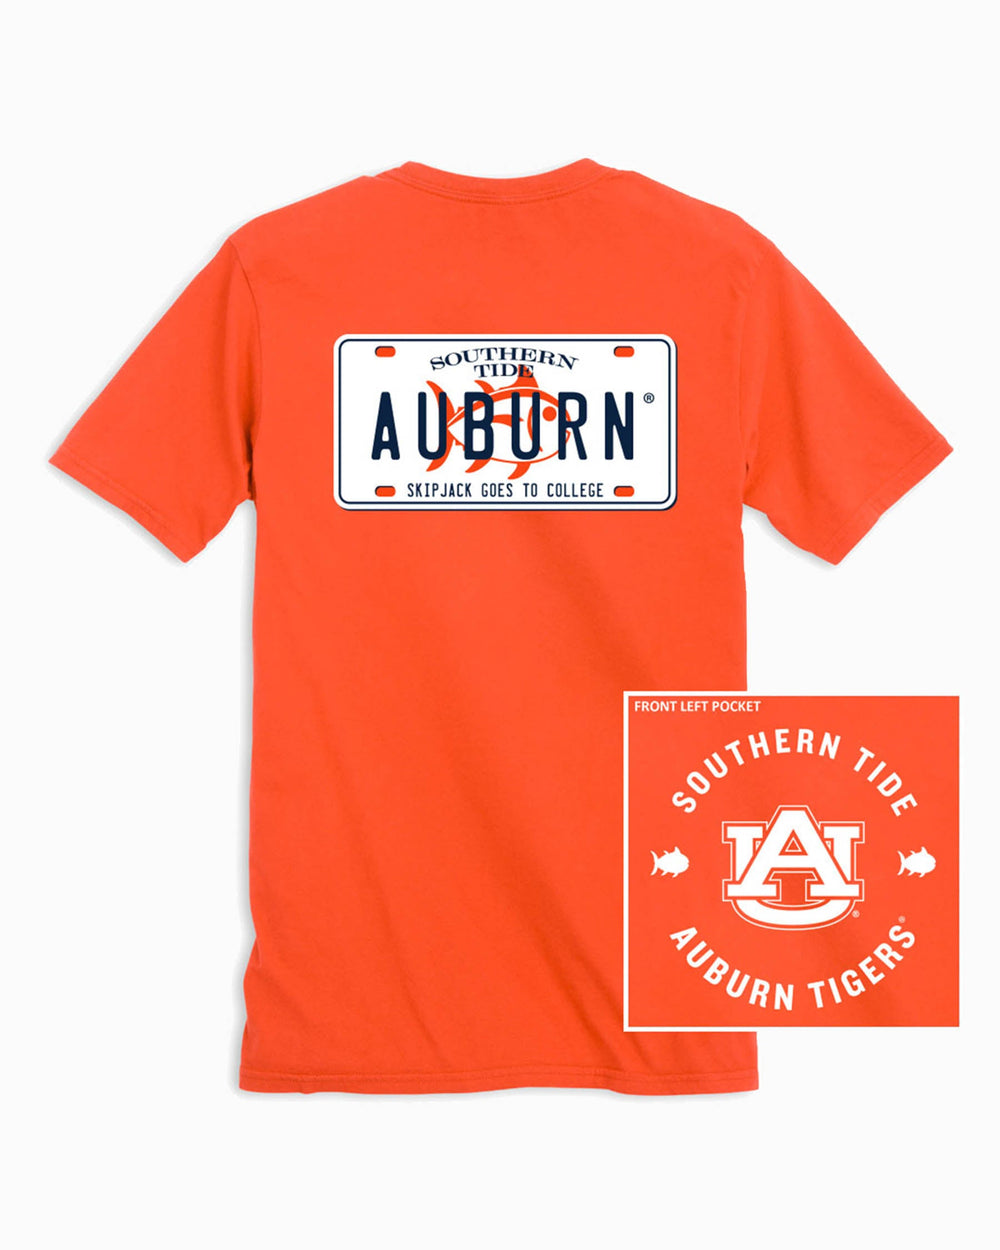 The front and back of the Auburn Tigers License Plate T-Shirt by Southern Tide - Endzone Orange